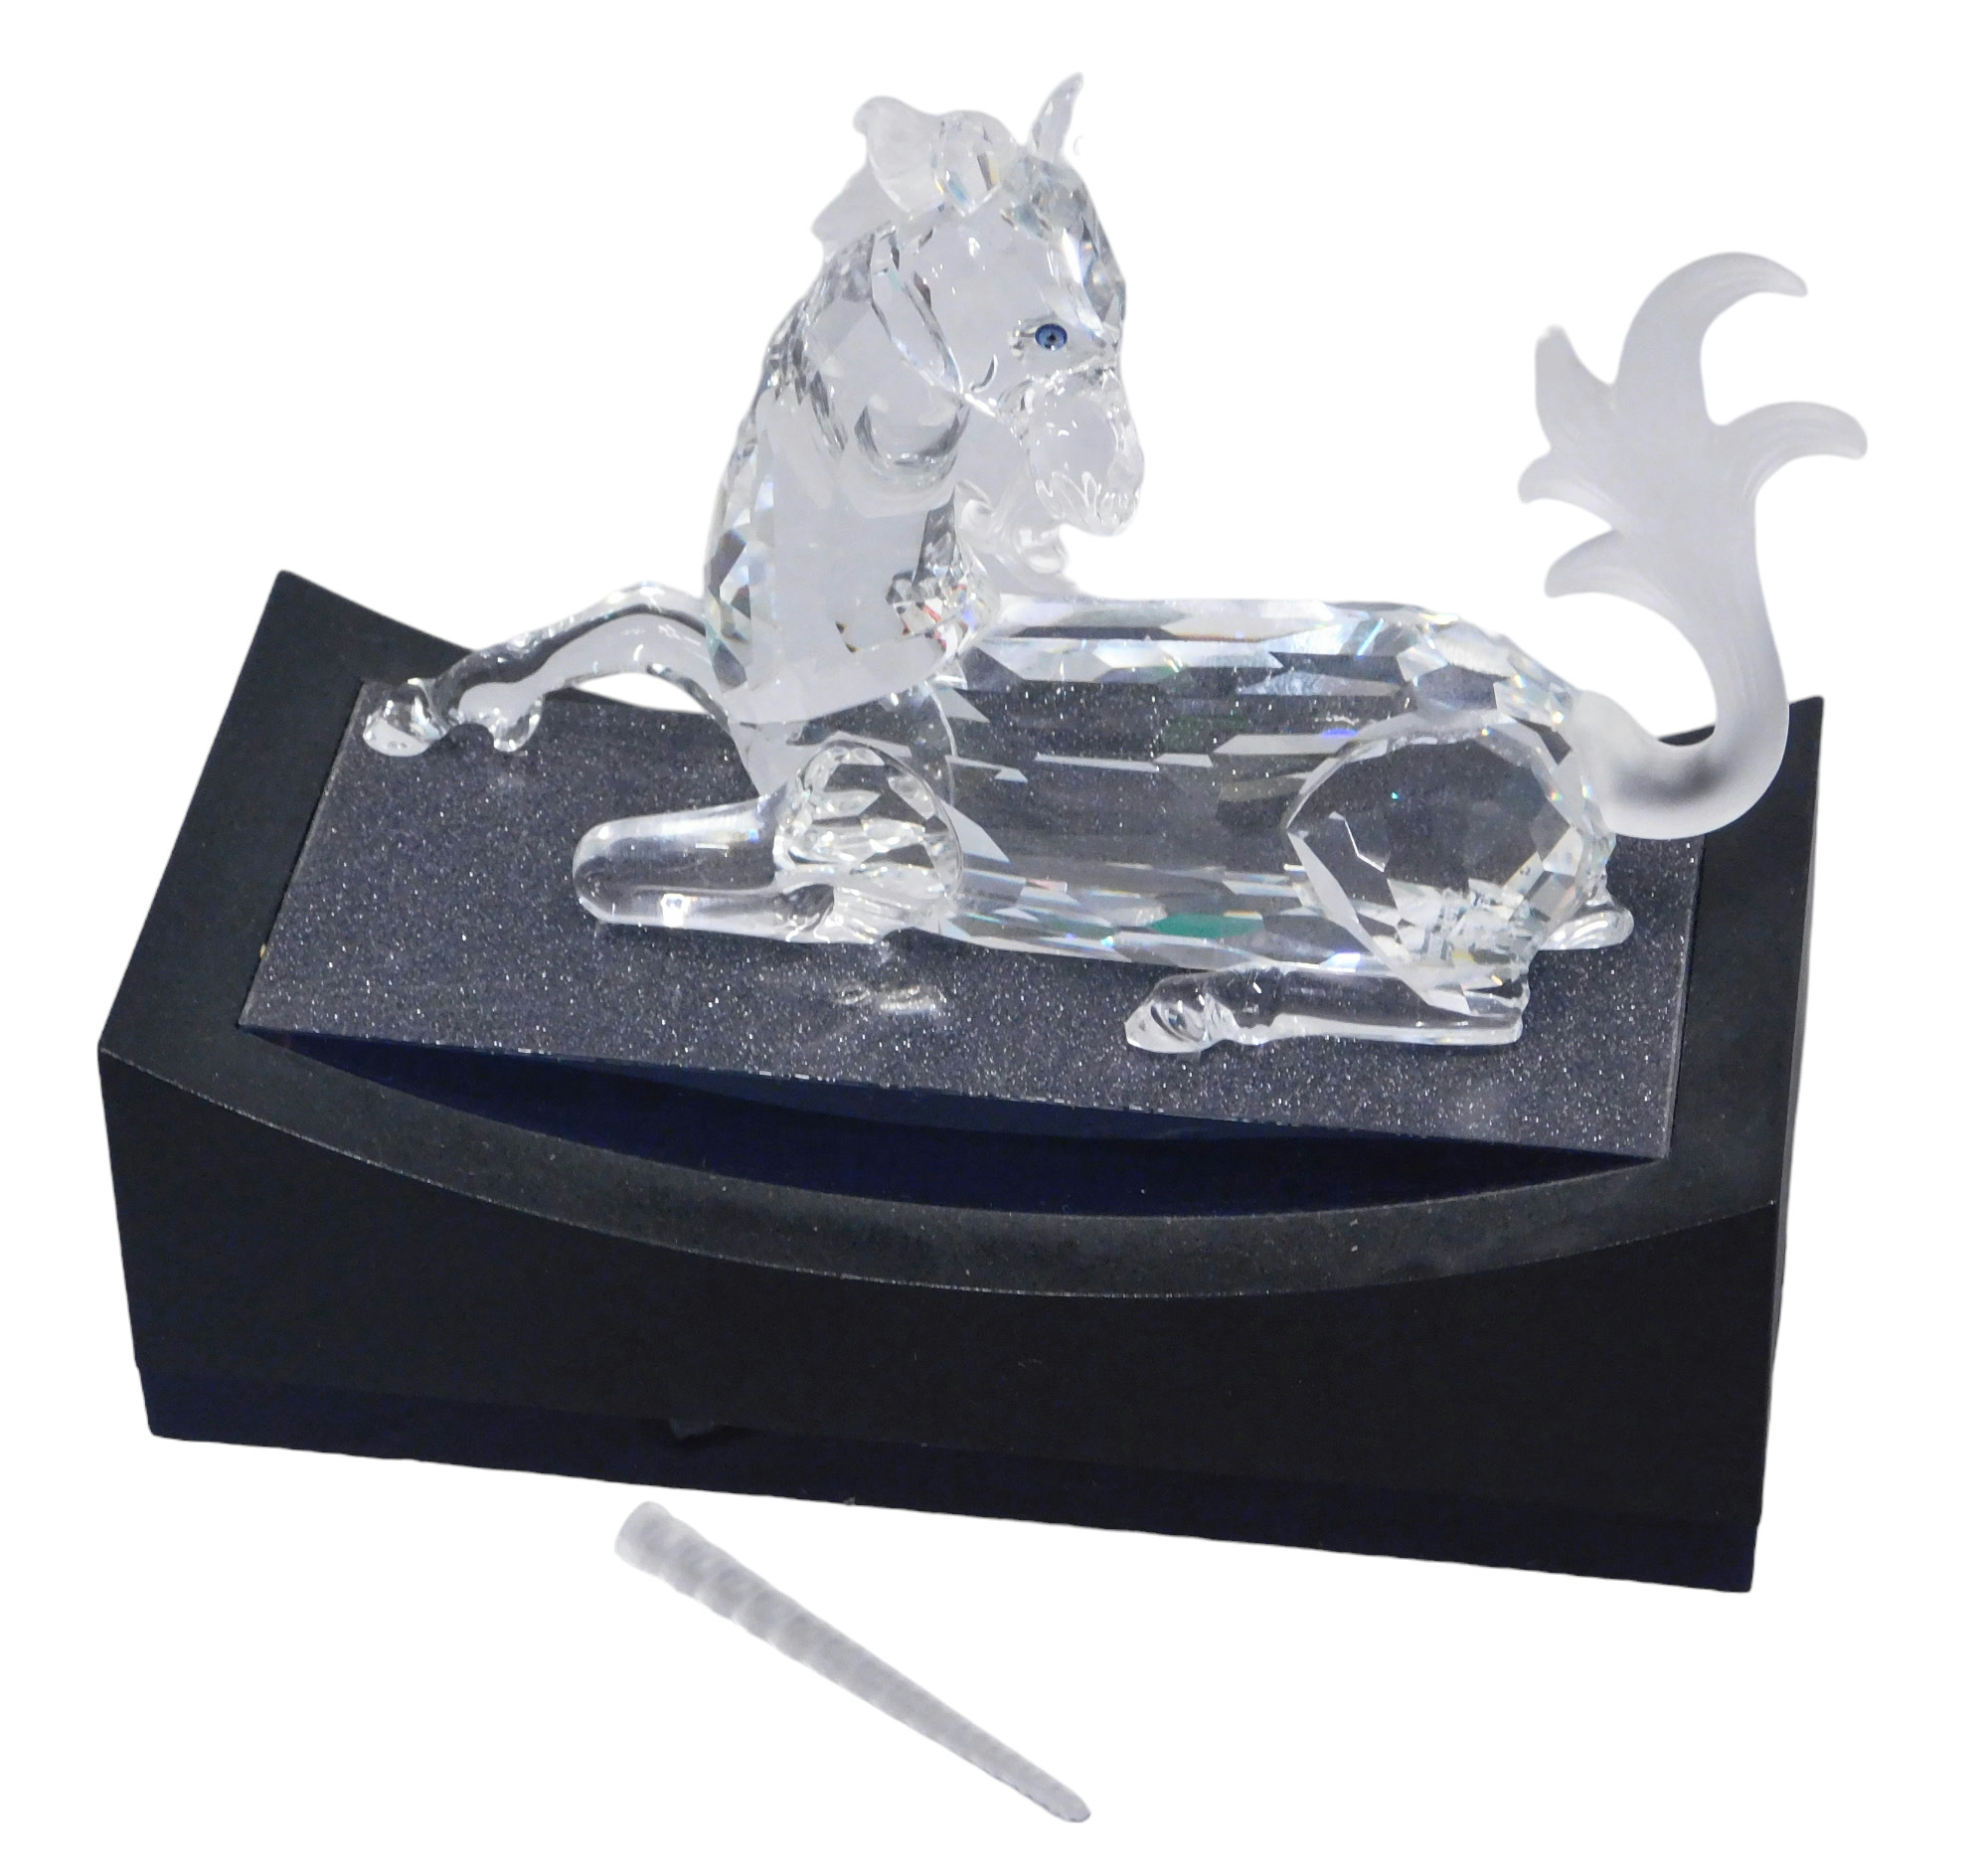 A Swarovski crystal Fabulous Creatures seated unicorn 1996, 11cm high, boxed, with display stand. (A